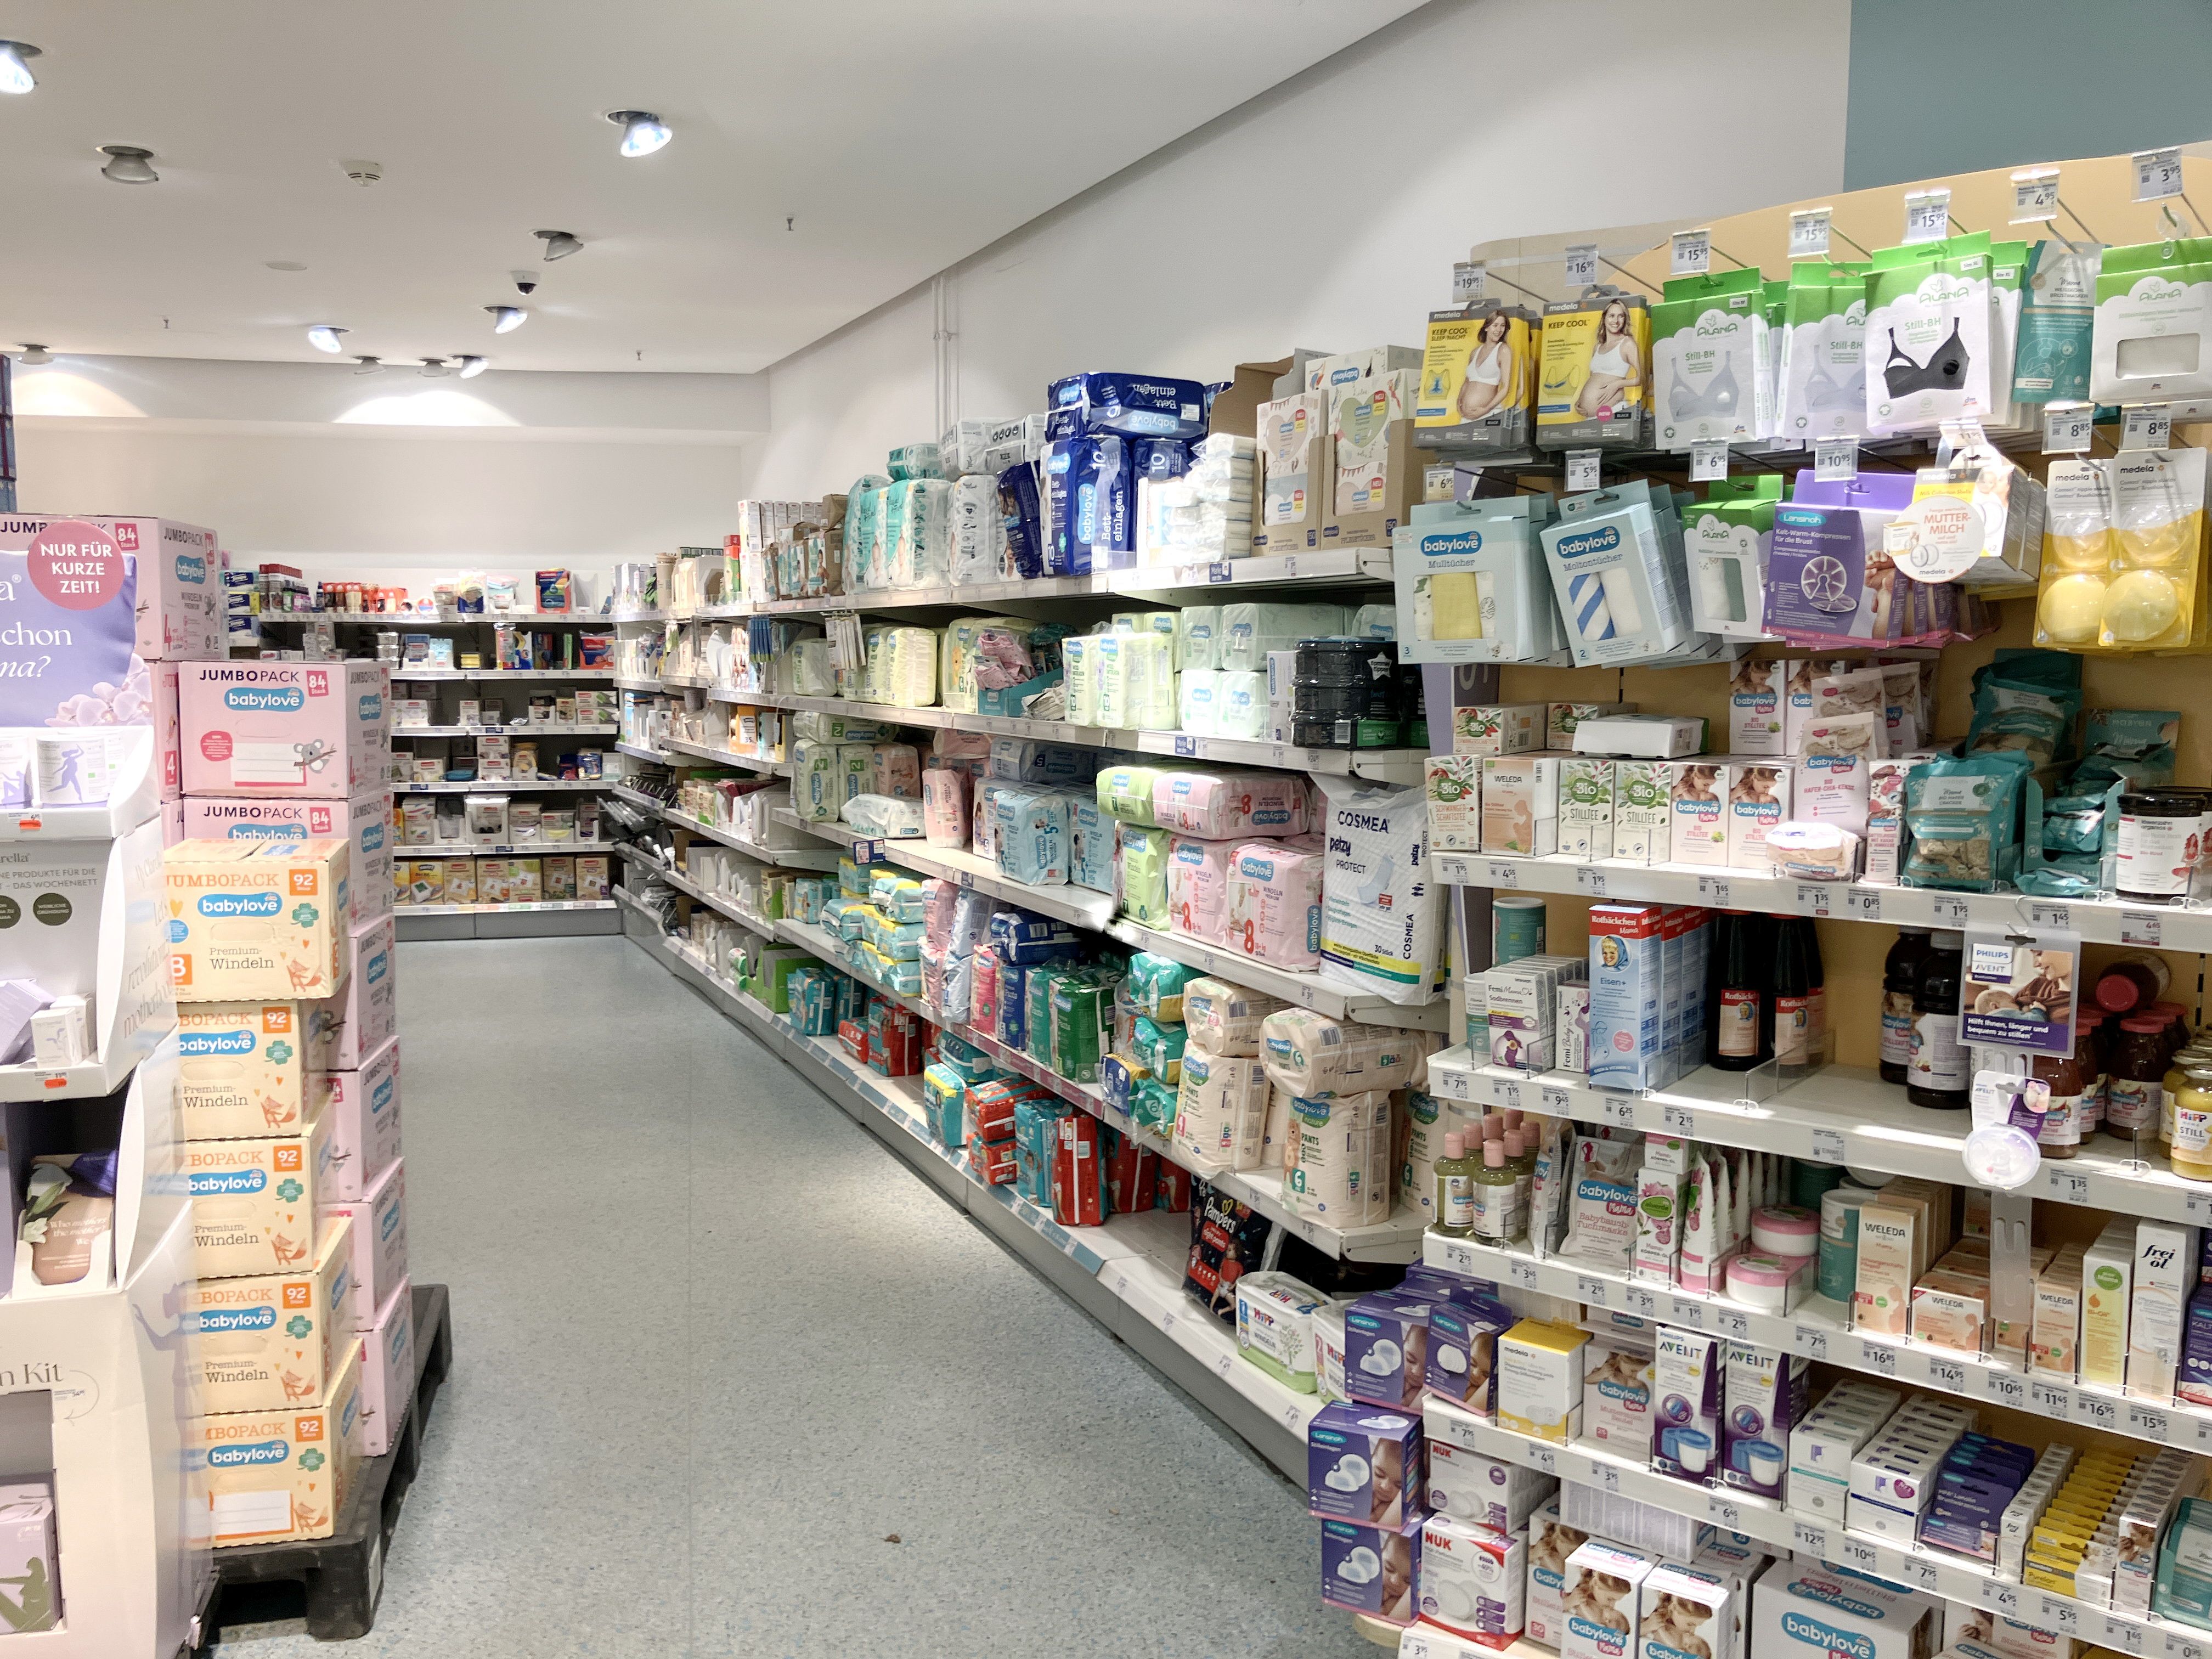 Approx. 122-10 m of drugstore shelves / used shop shelves, suitable for approx. 593 m² of sales area